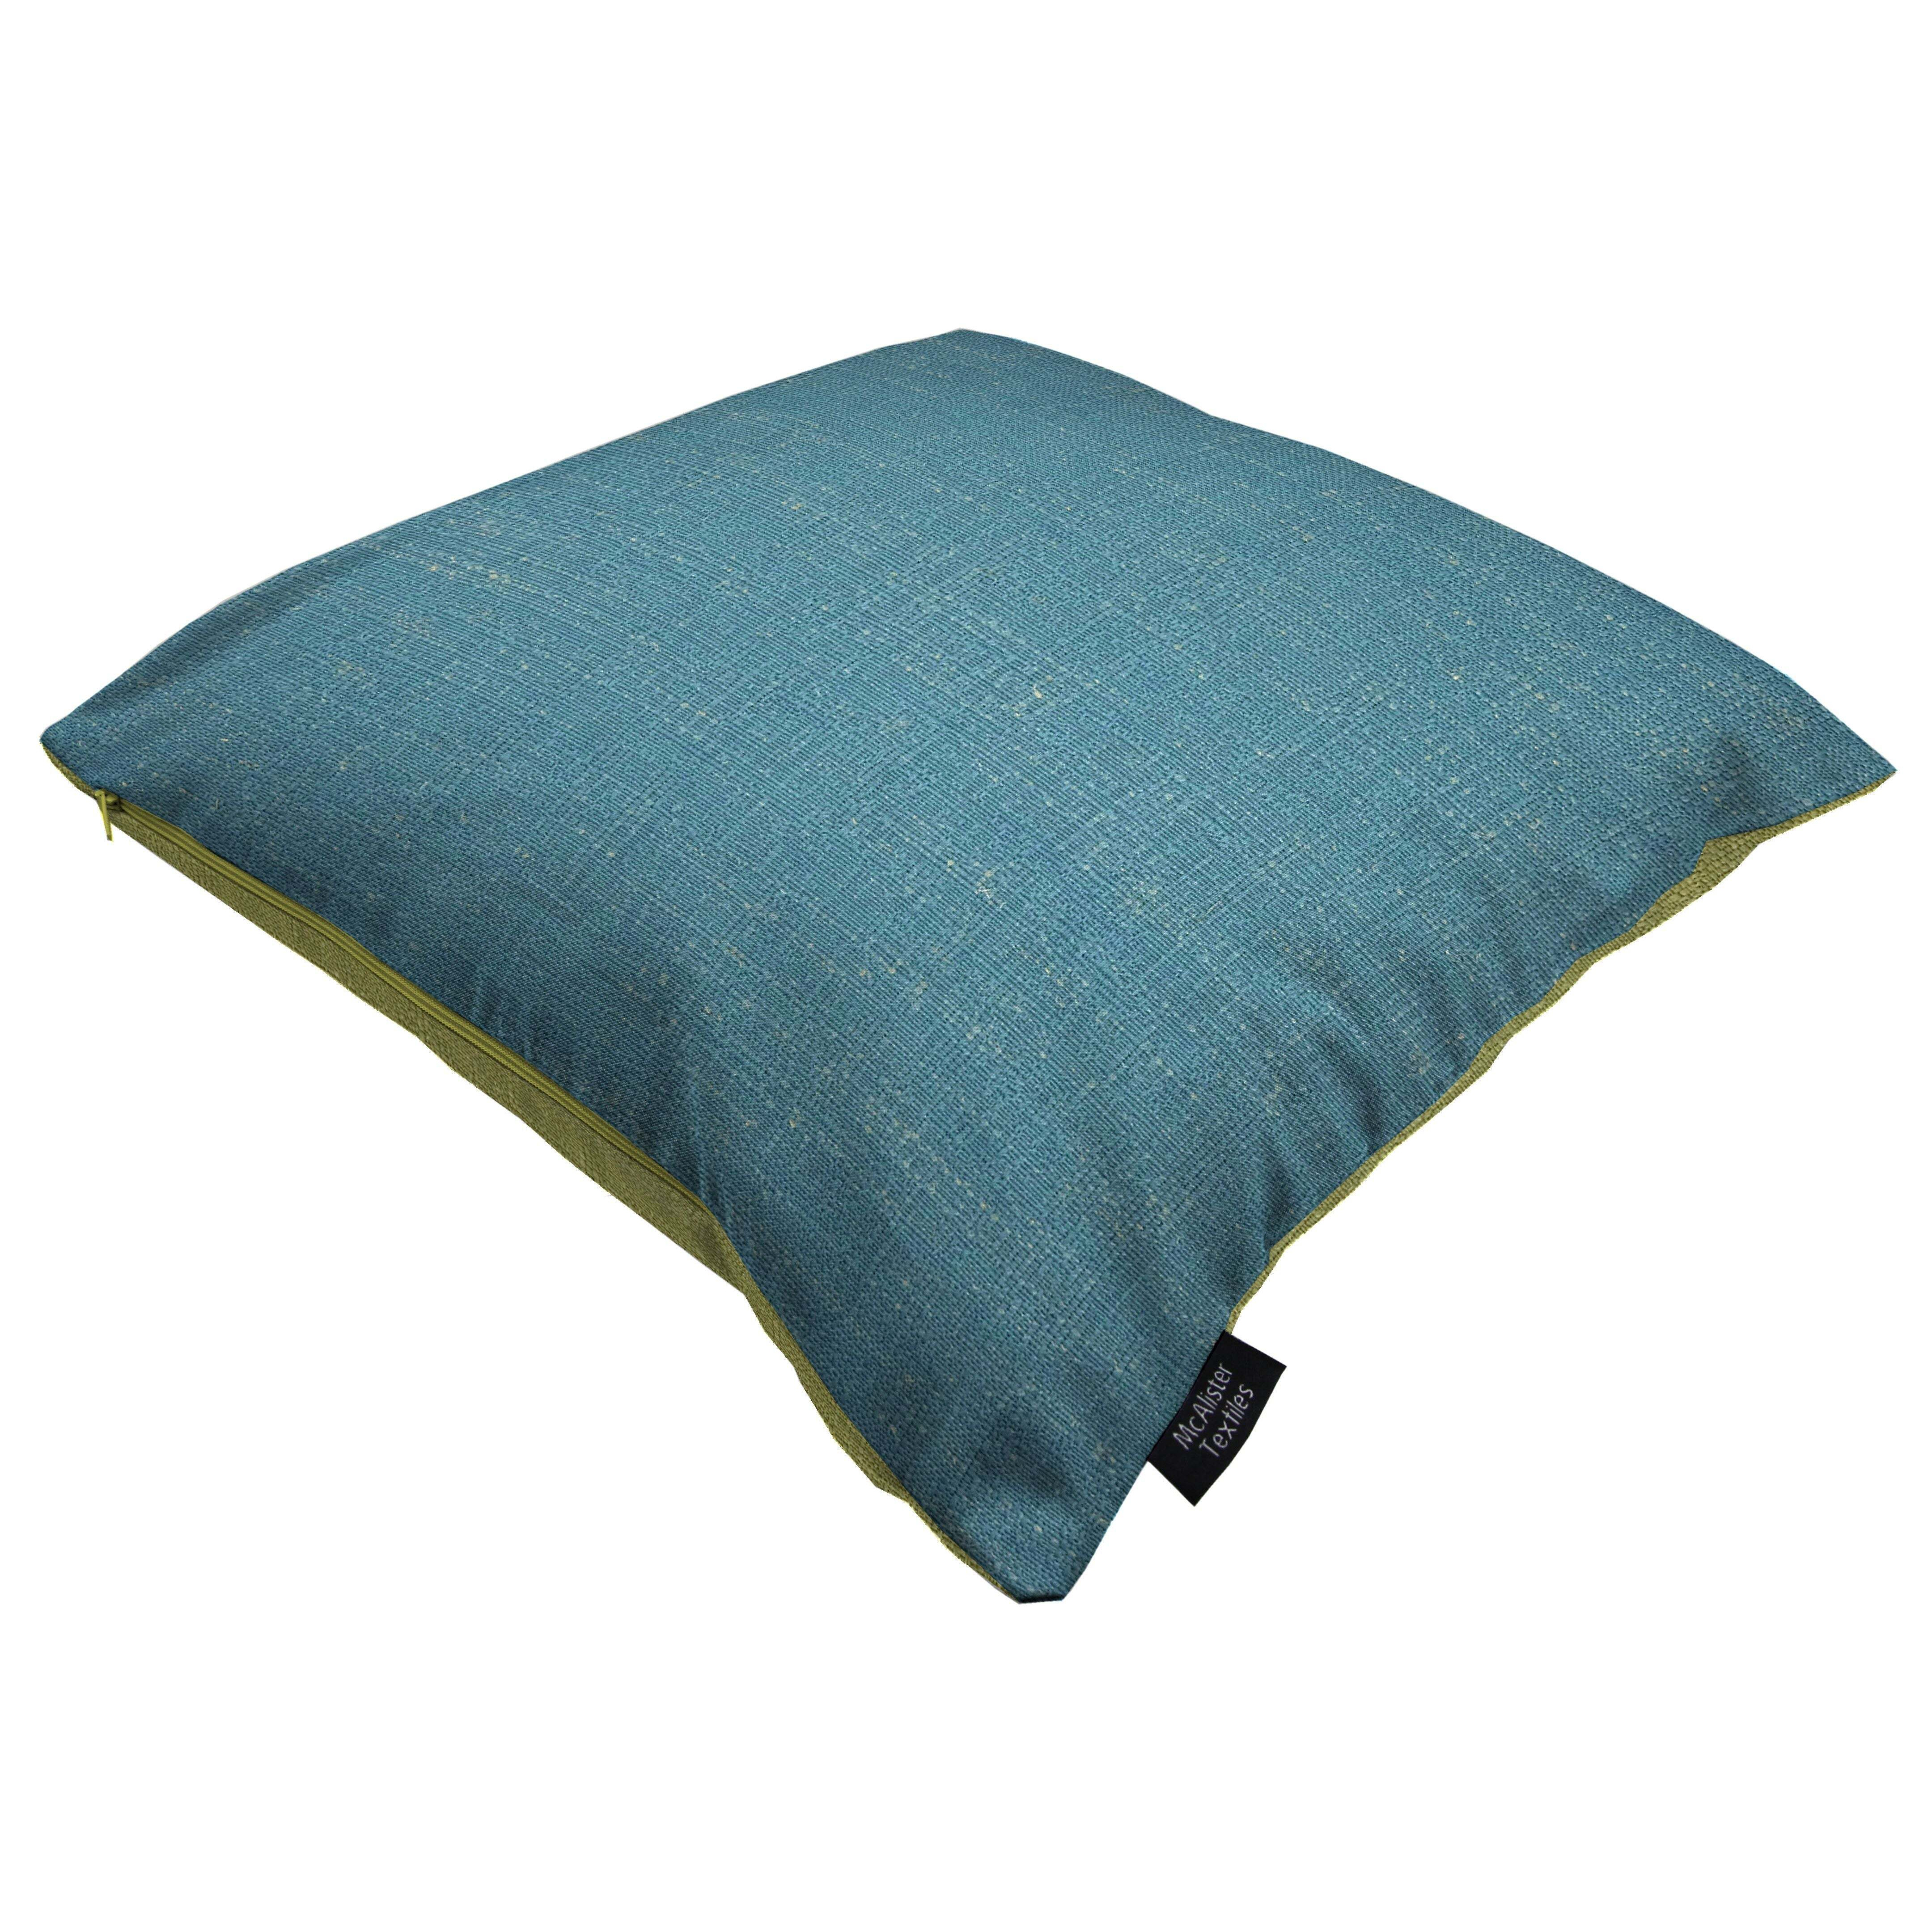 Harmony Teal and Sage Green Plain Cushions, Cover Only / 49cm x 49cm